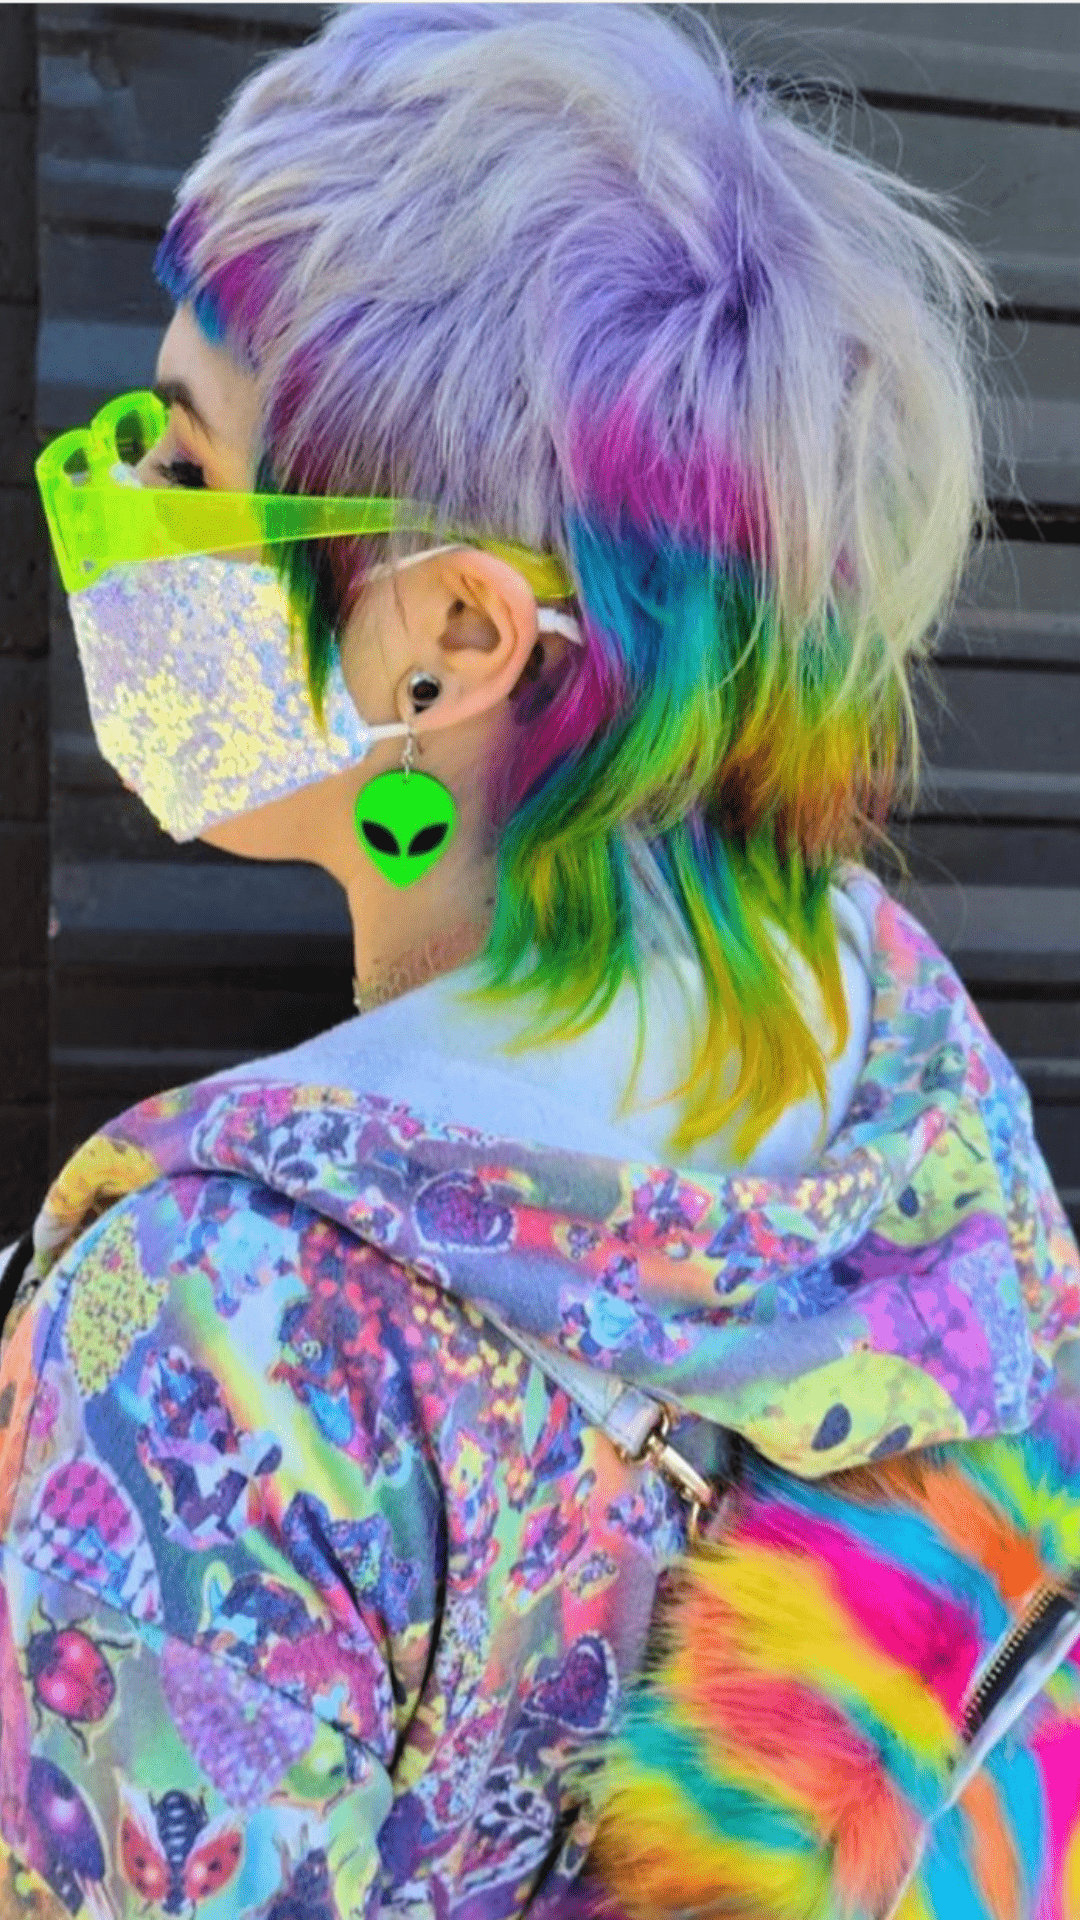 A woman with colorful hair wearing an eye mask - Punk